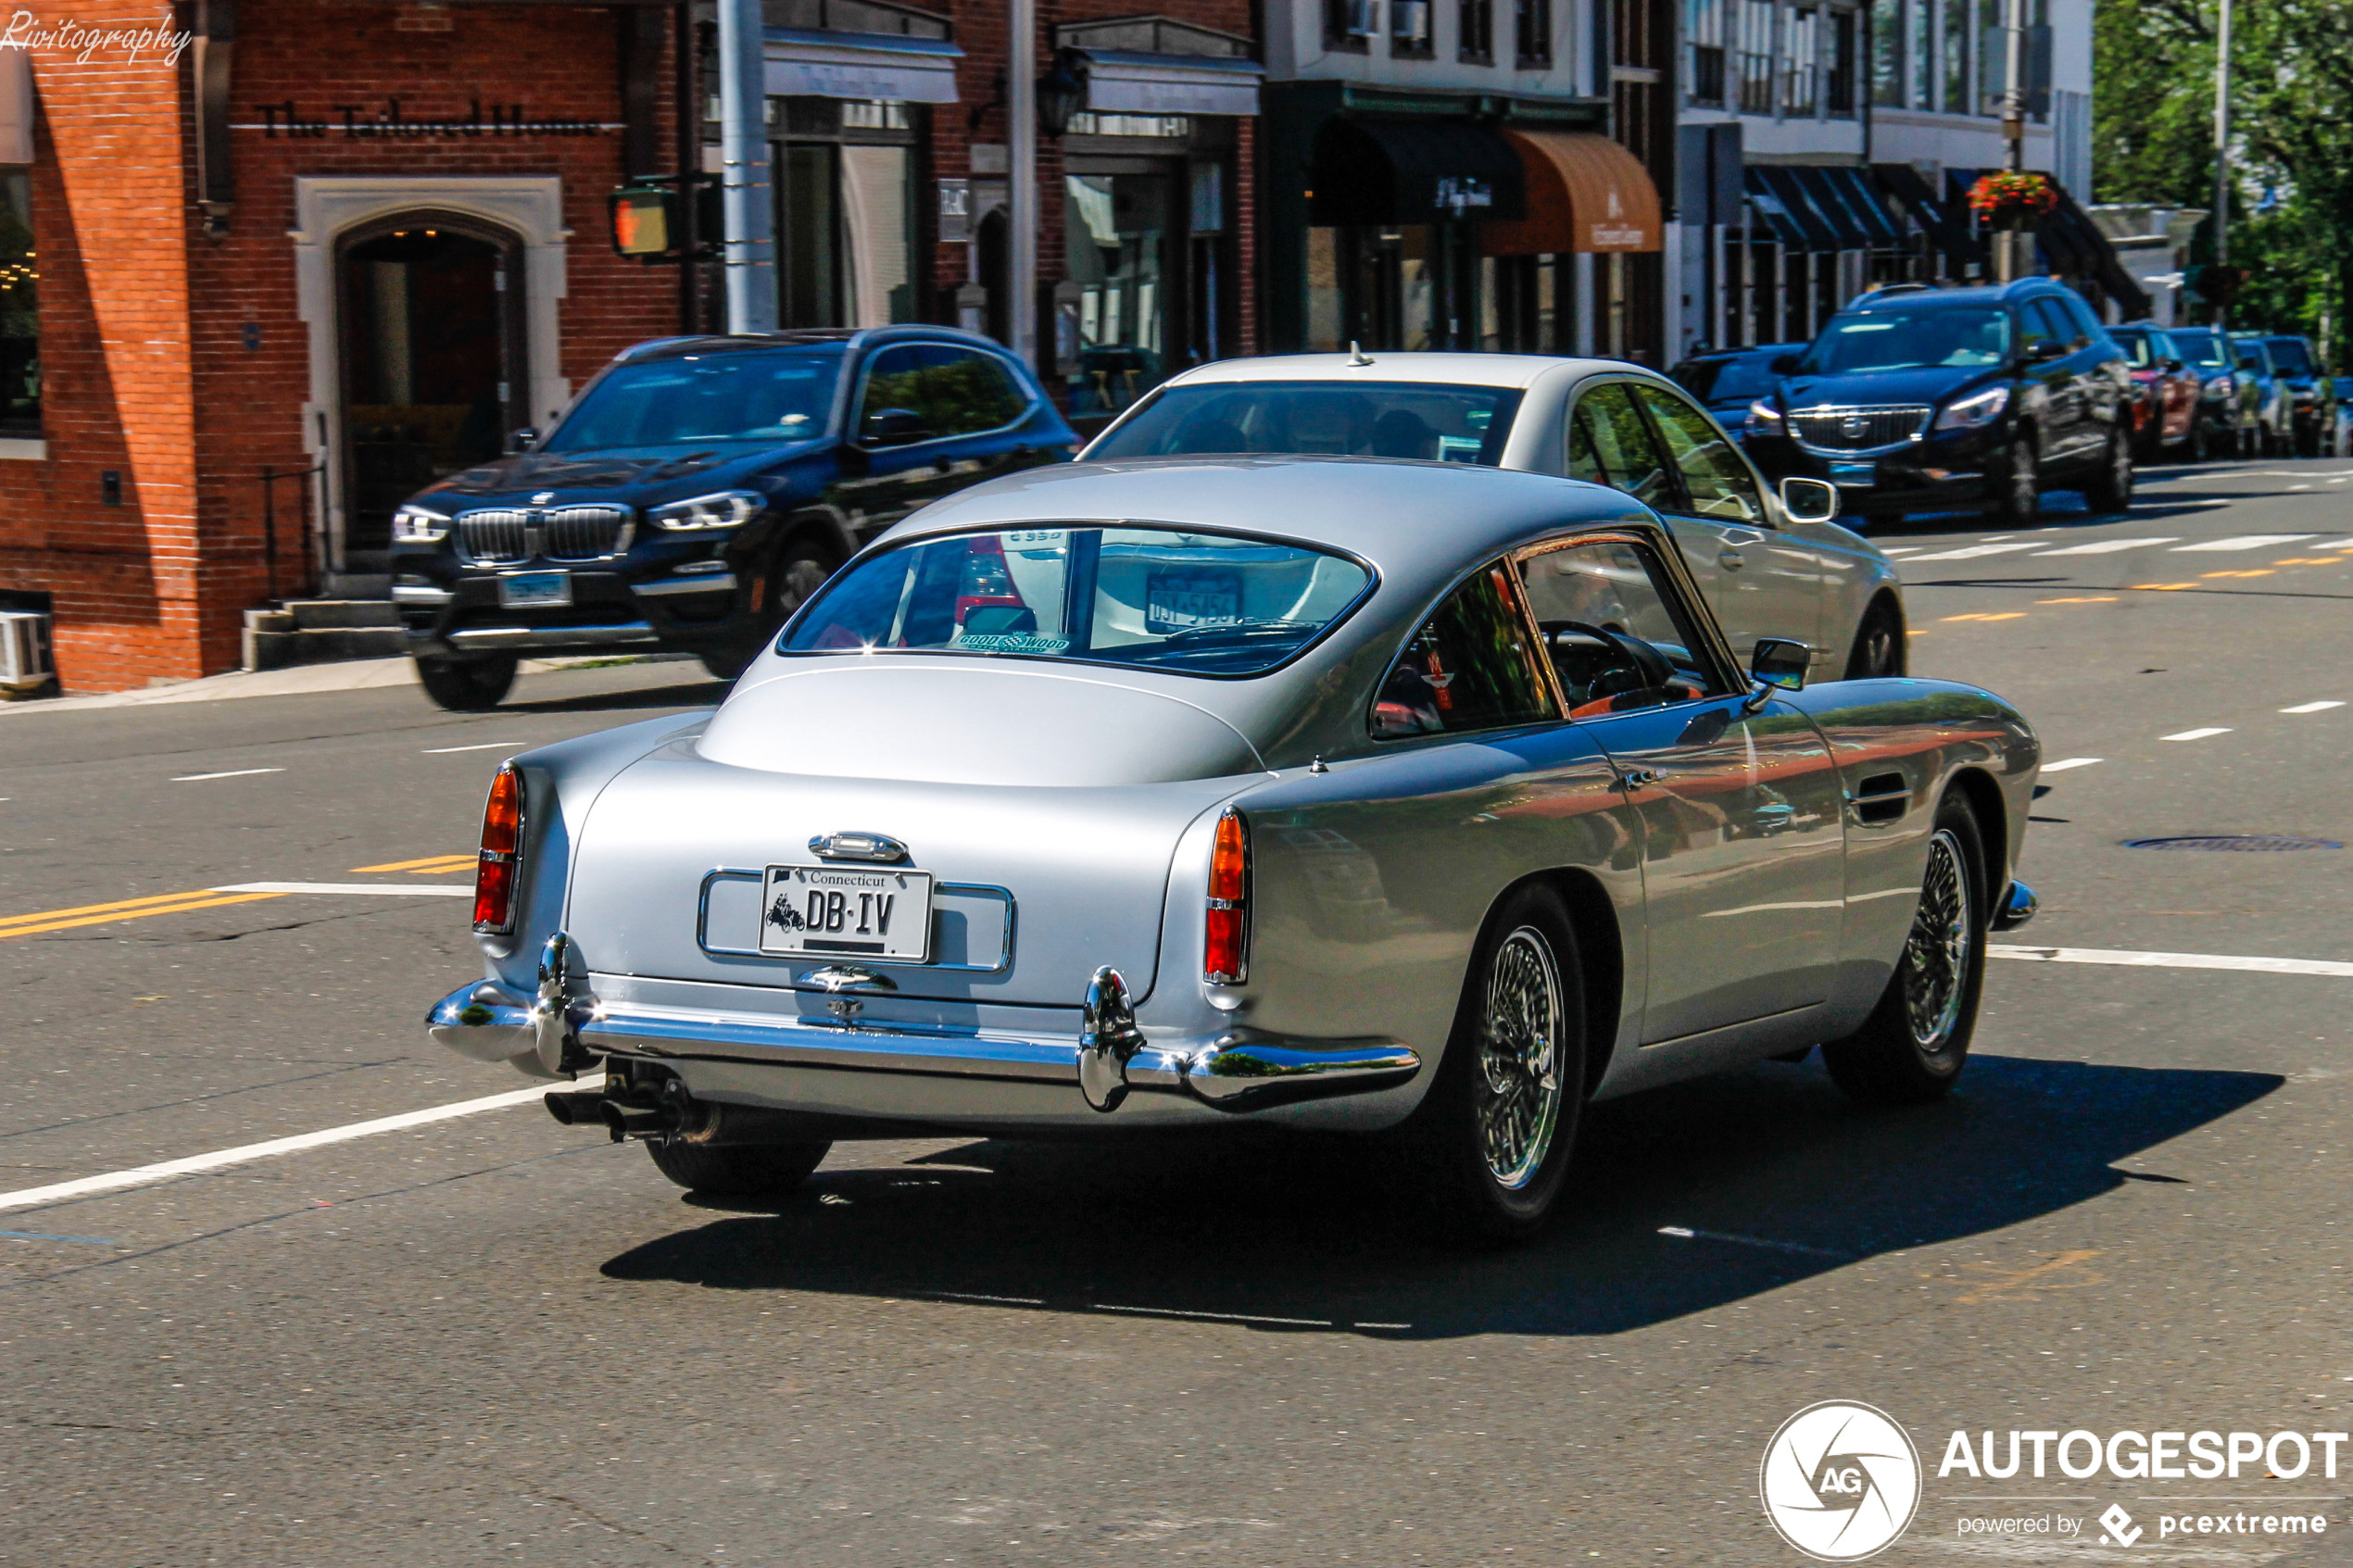 Spot of the day USA: Aston Martin DB4 by Rivitography